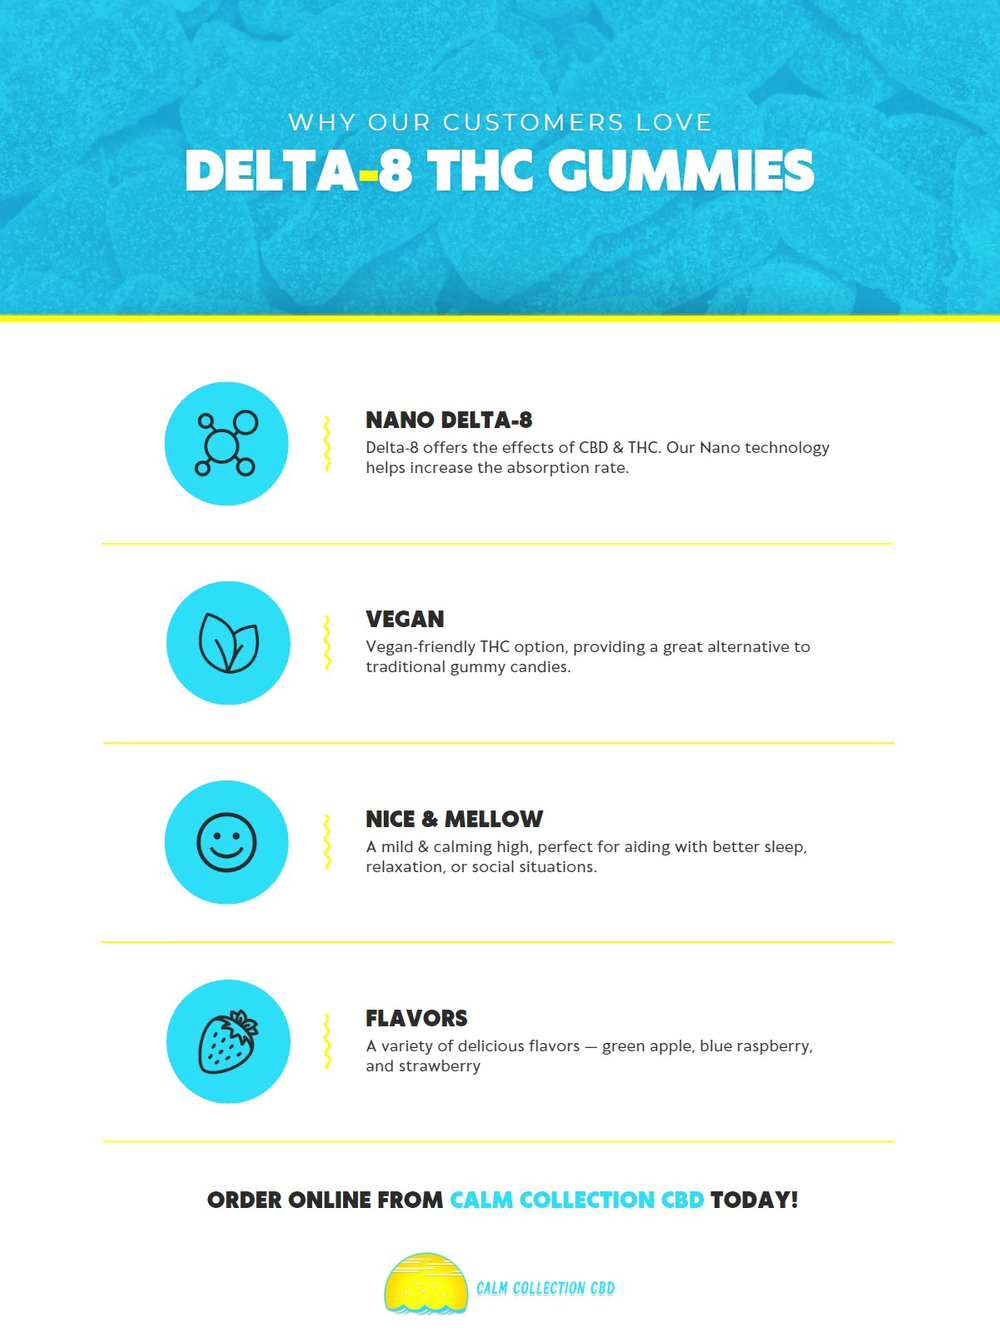 M37602 - Calm Collection CBD - Infographic - Why Our Customers Love Delta-8 THC Gummies.jpg